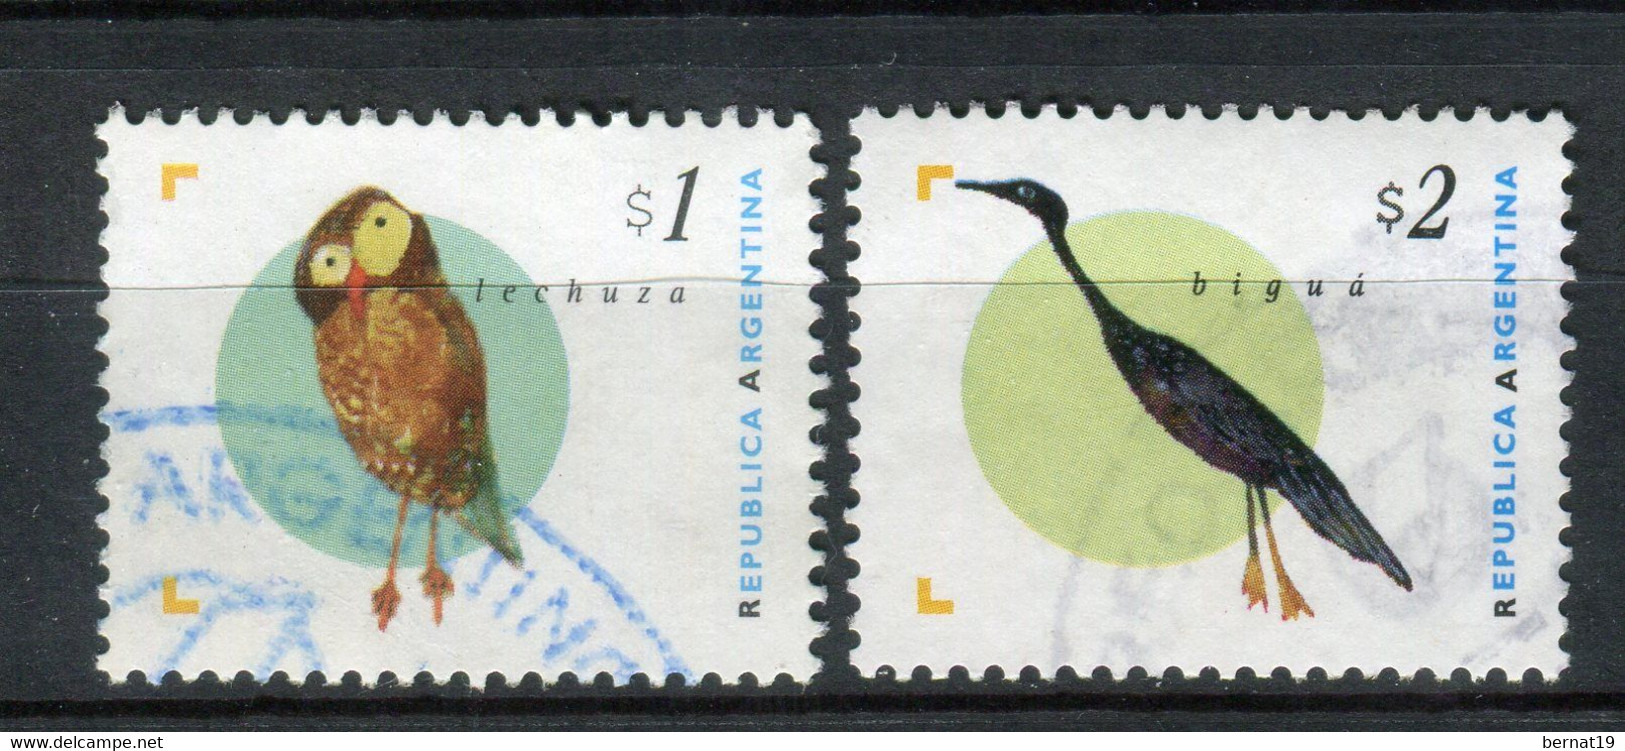 Argentina 1995. Yvert 1889-90 Usado. - Used Stamps